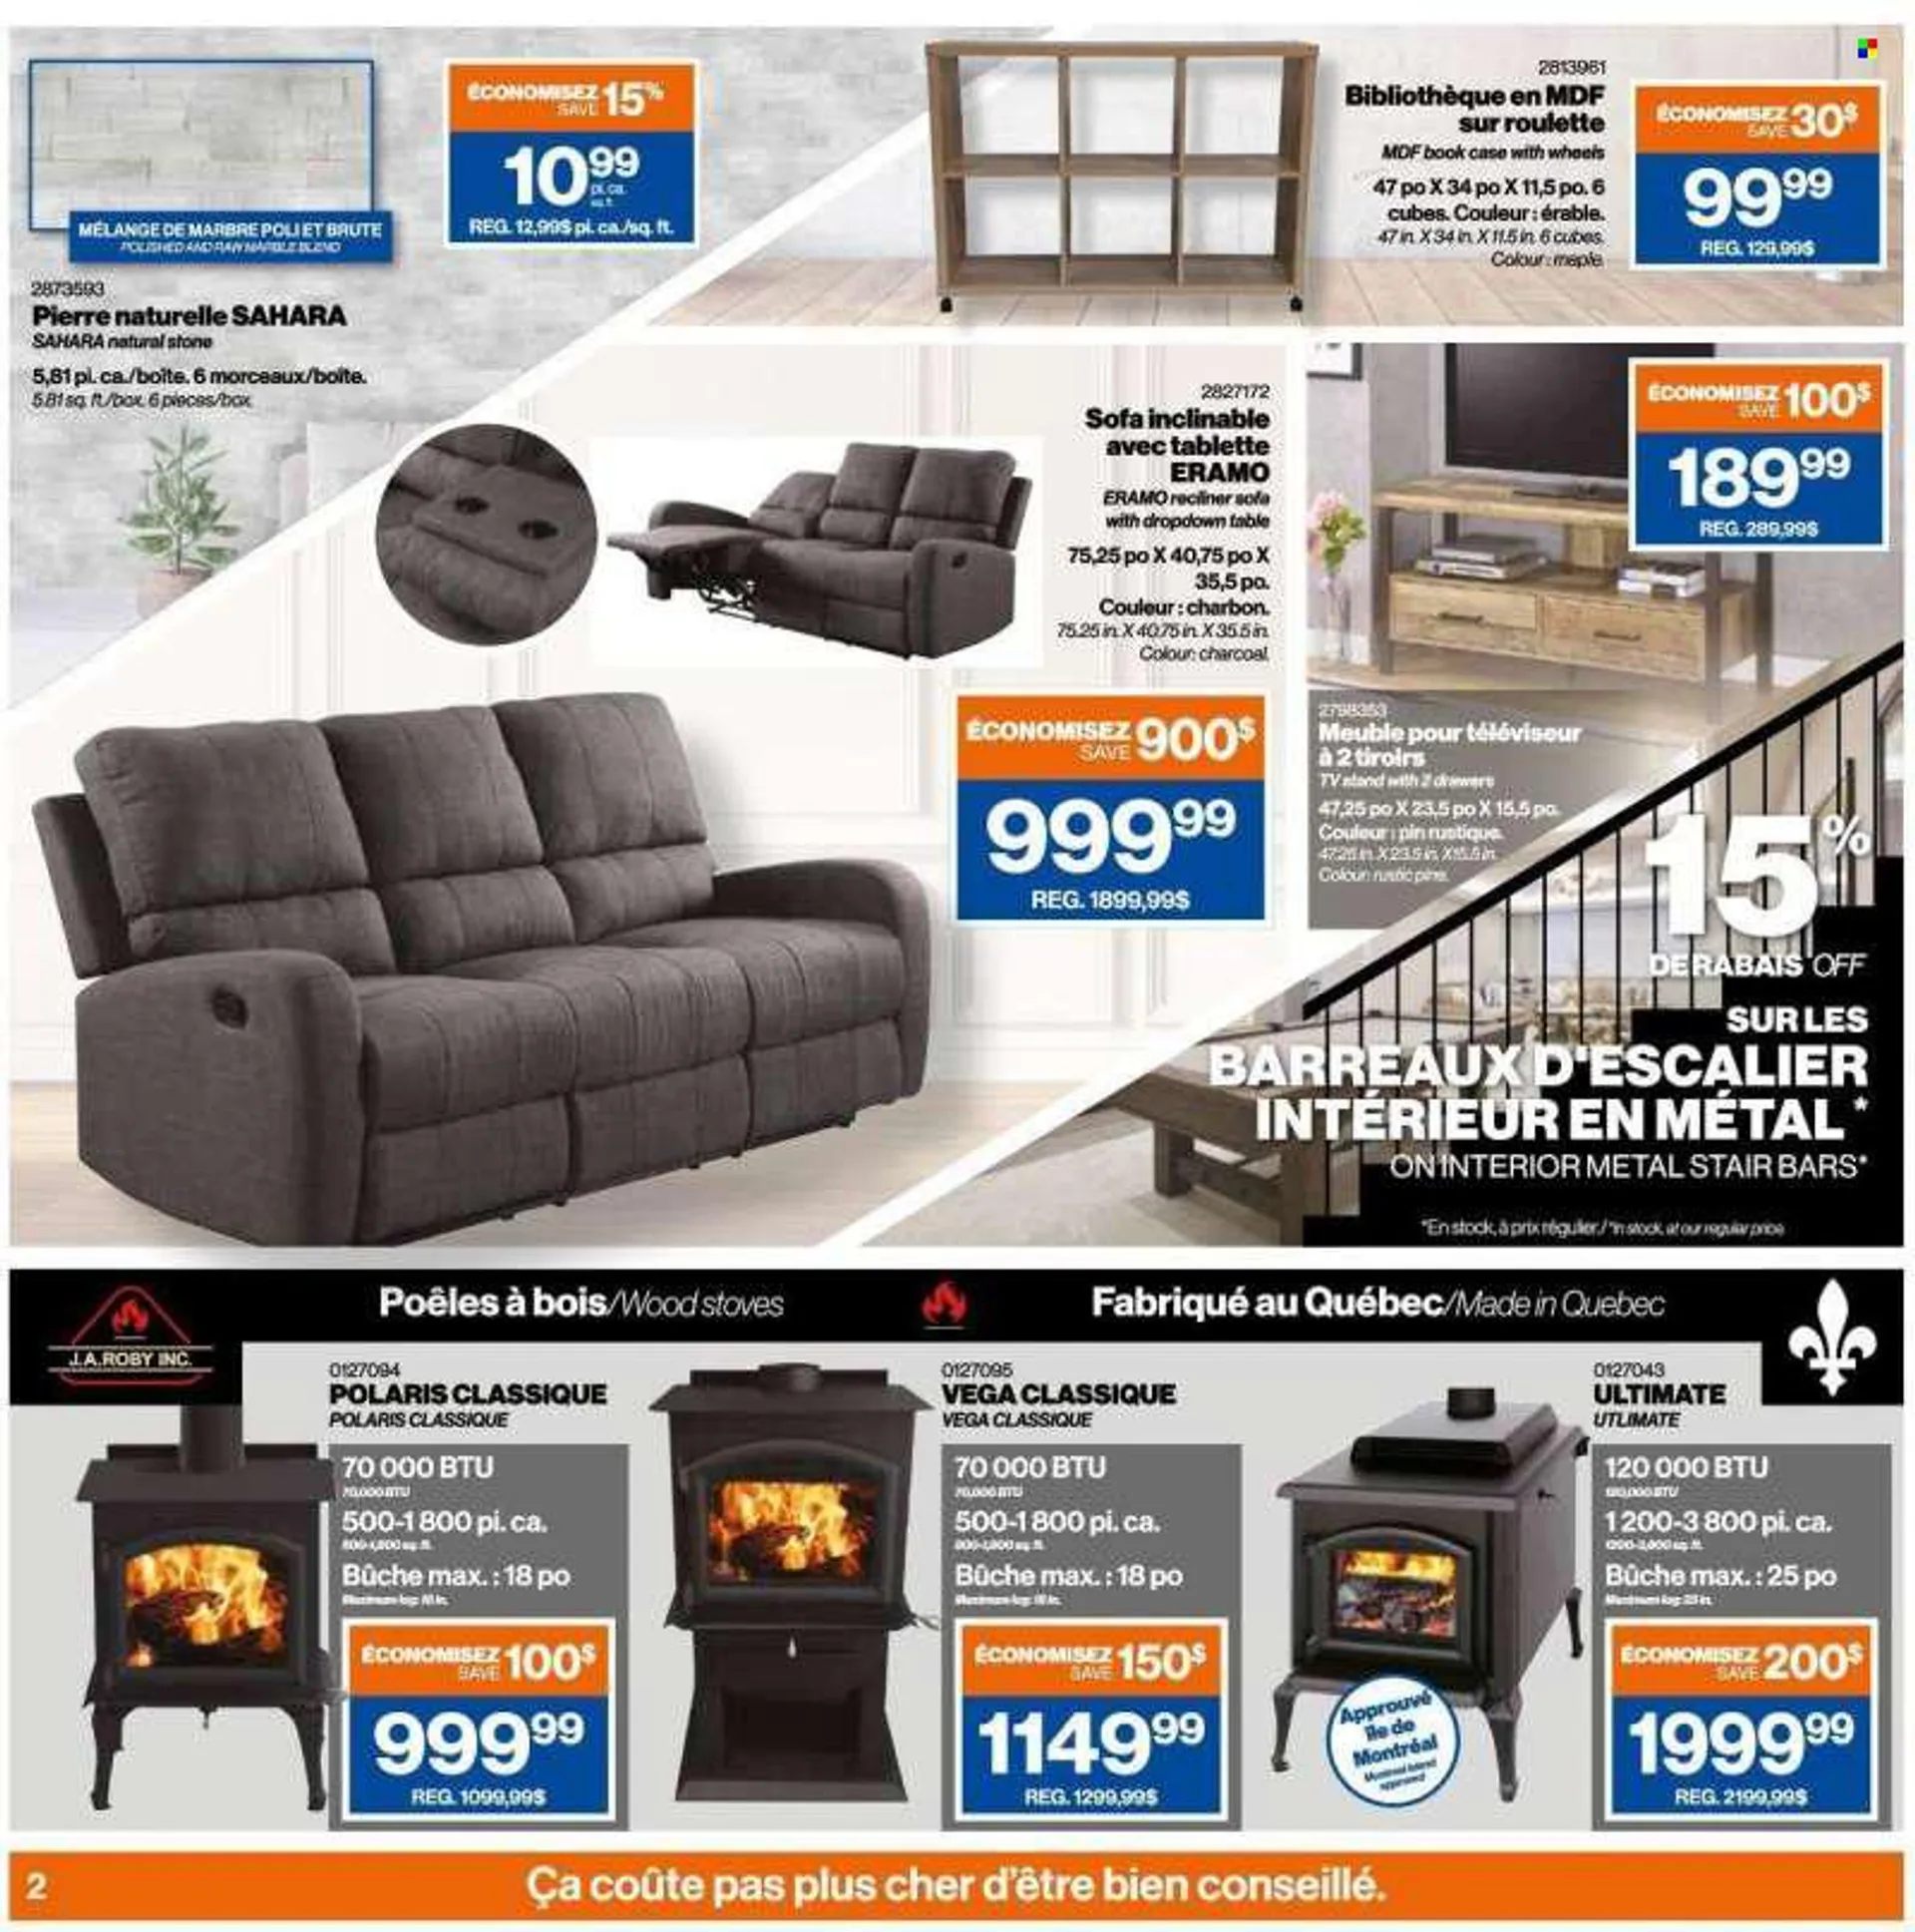 Patrick Morin Flyer - August 11, 2022 - August 17, 2022 - Sales products - pin, table, sofa, recliner chair, TV stand, Polaris. Page 2.